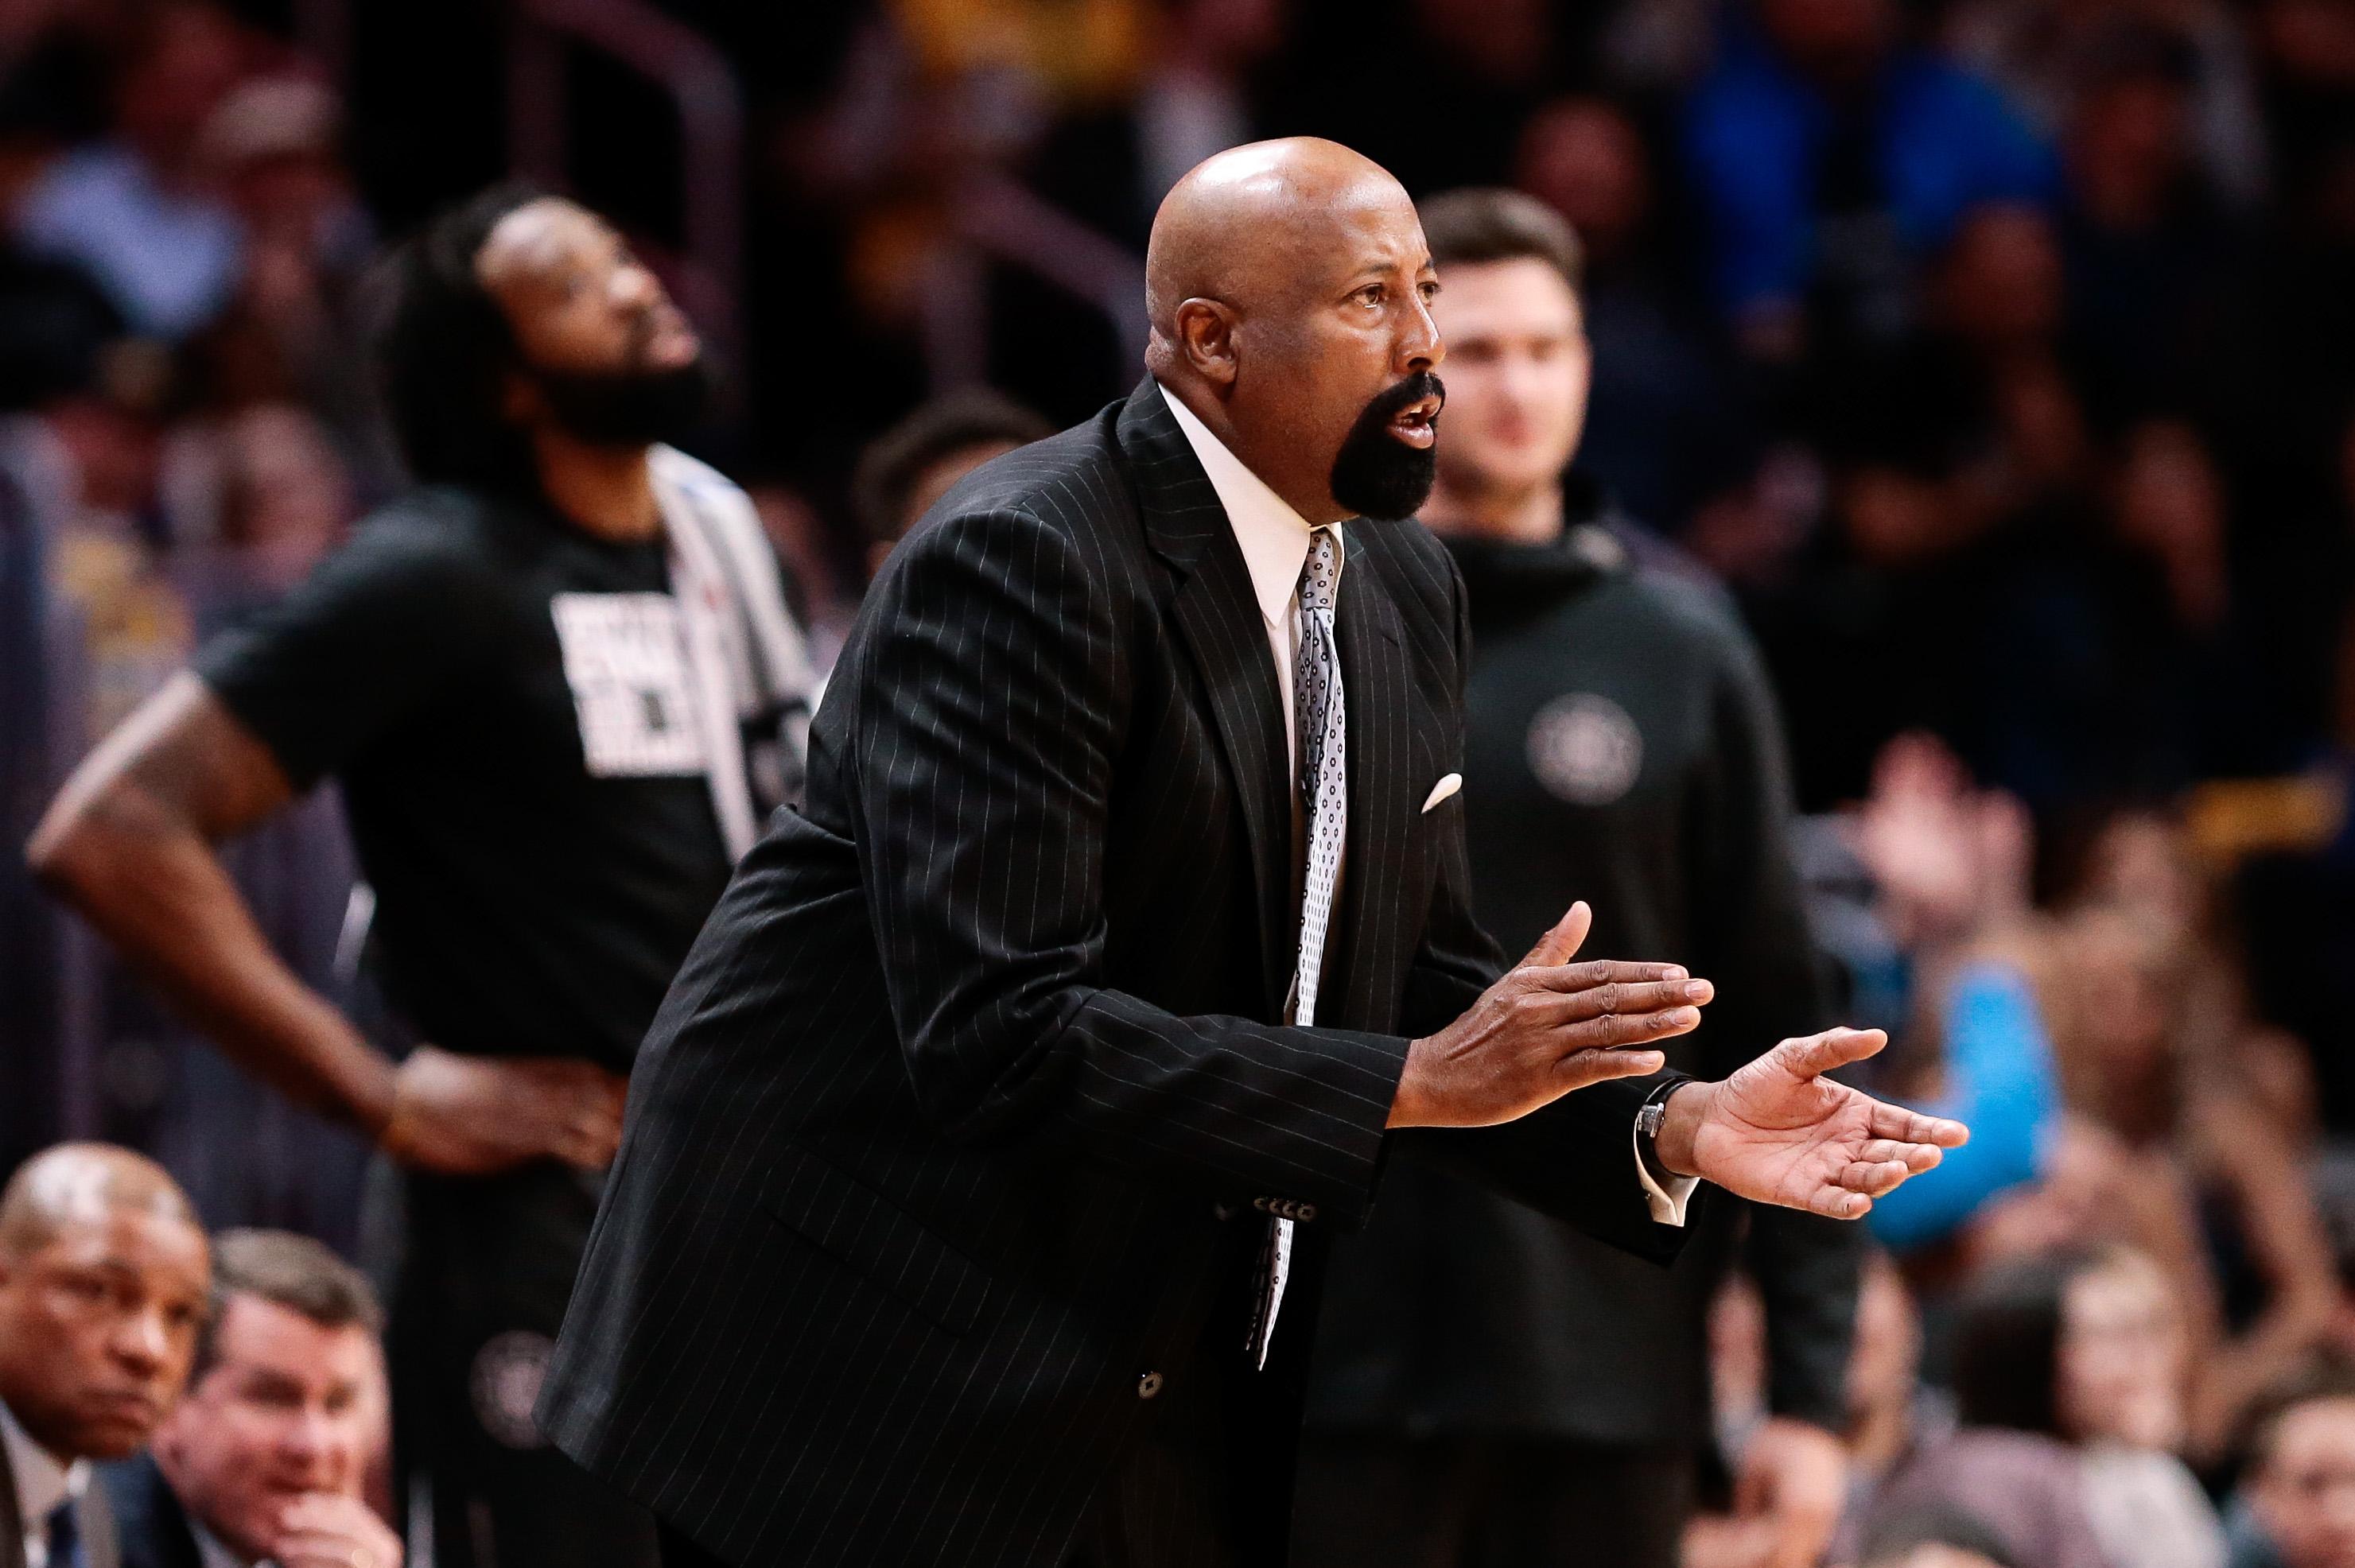 Feb 27, 2018; Denver, CO, USA; Los Angeles Clippers assistant coach Mike Woodson in the fourth quarter against the Denver Nuggets at the Pepsi Center. Mandatory Credit: Isaiah J. Downing-USA TODAY Sports / © Isaiah J. Downing-USA TODAY Sports